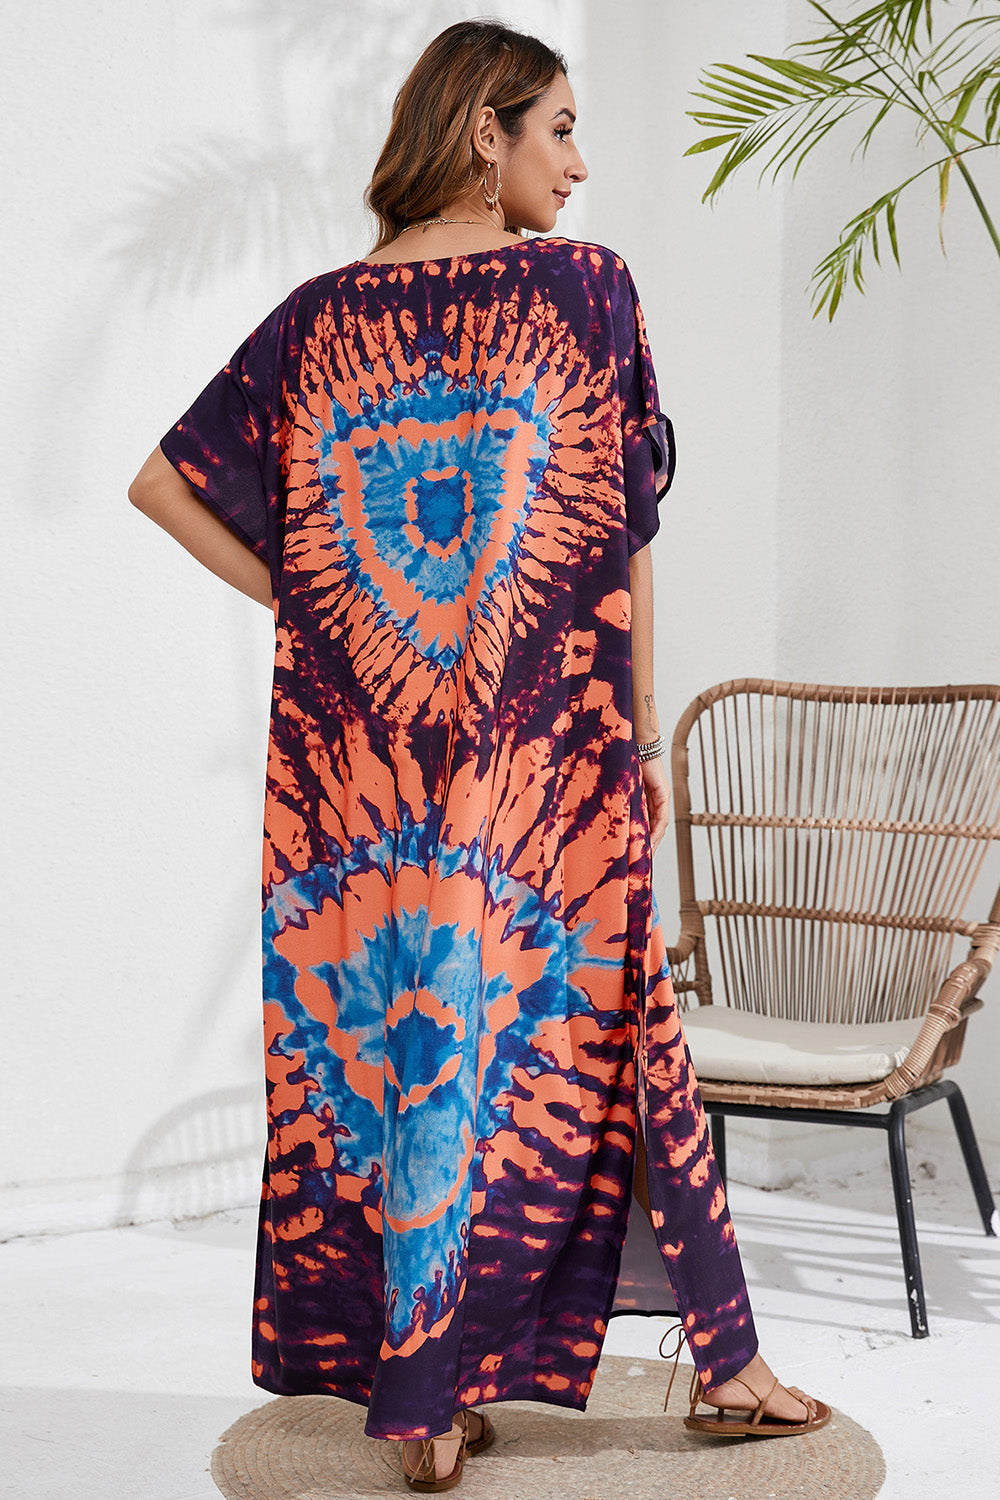 Painted Cover Up:  V-Neck Printed Cover Up With Bold Colors